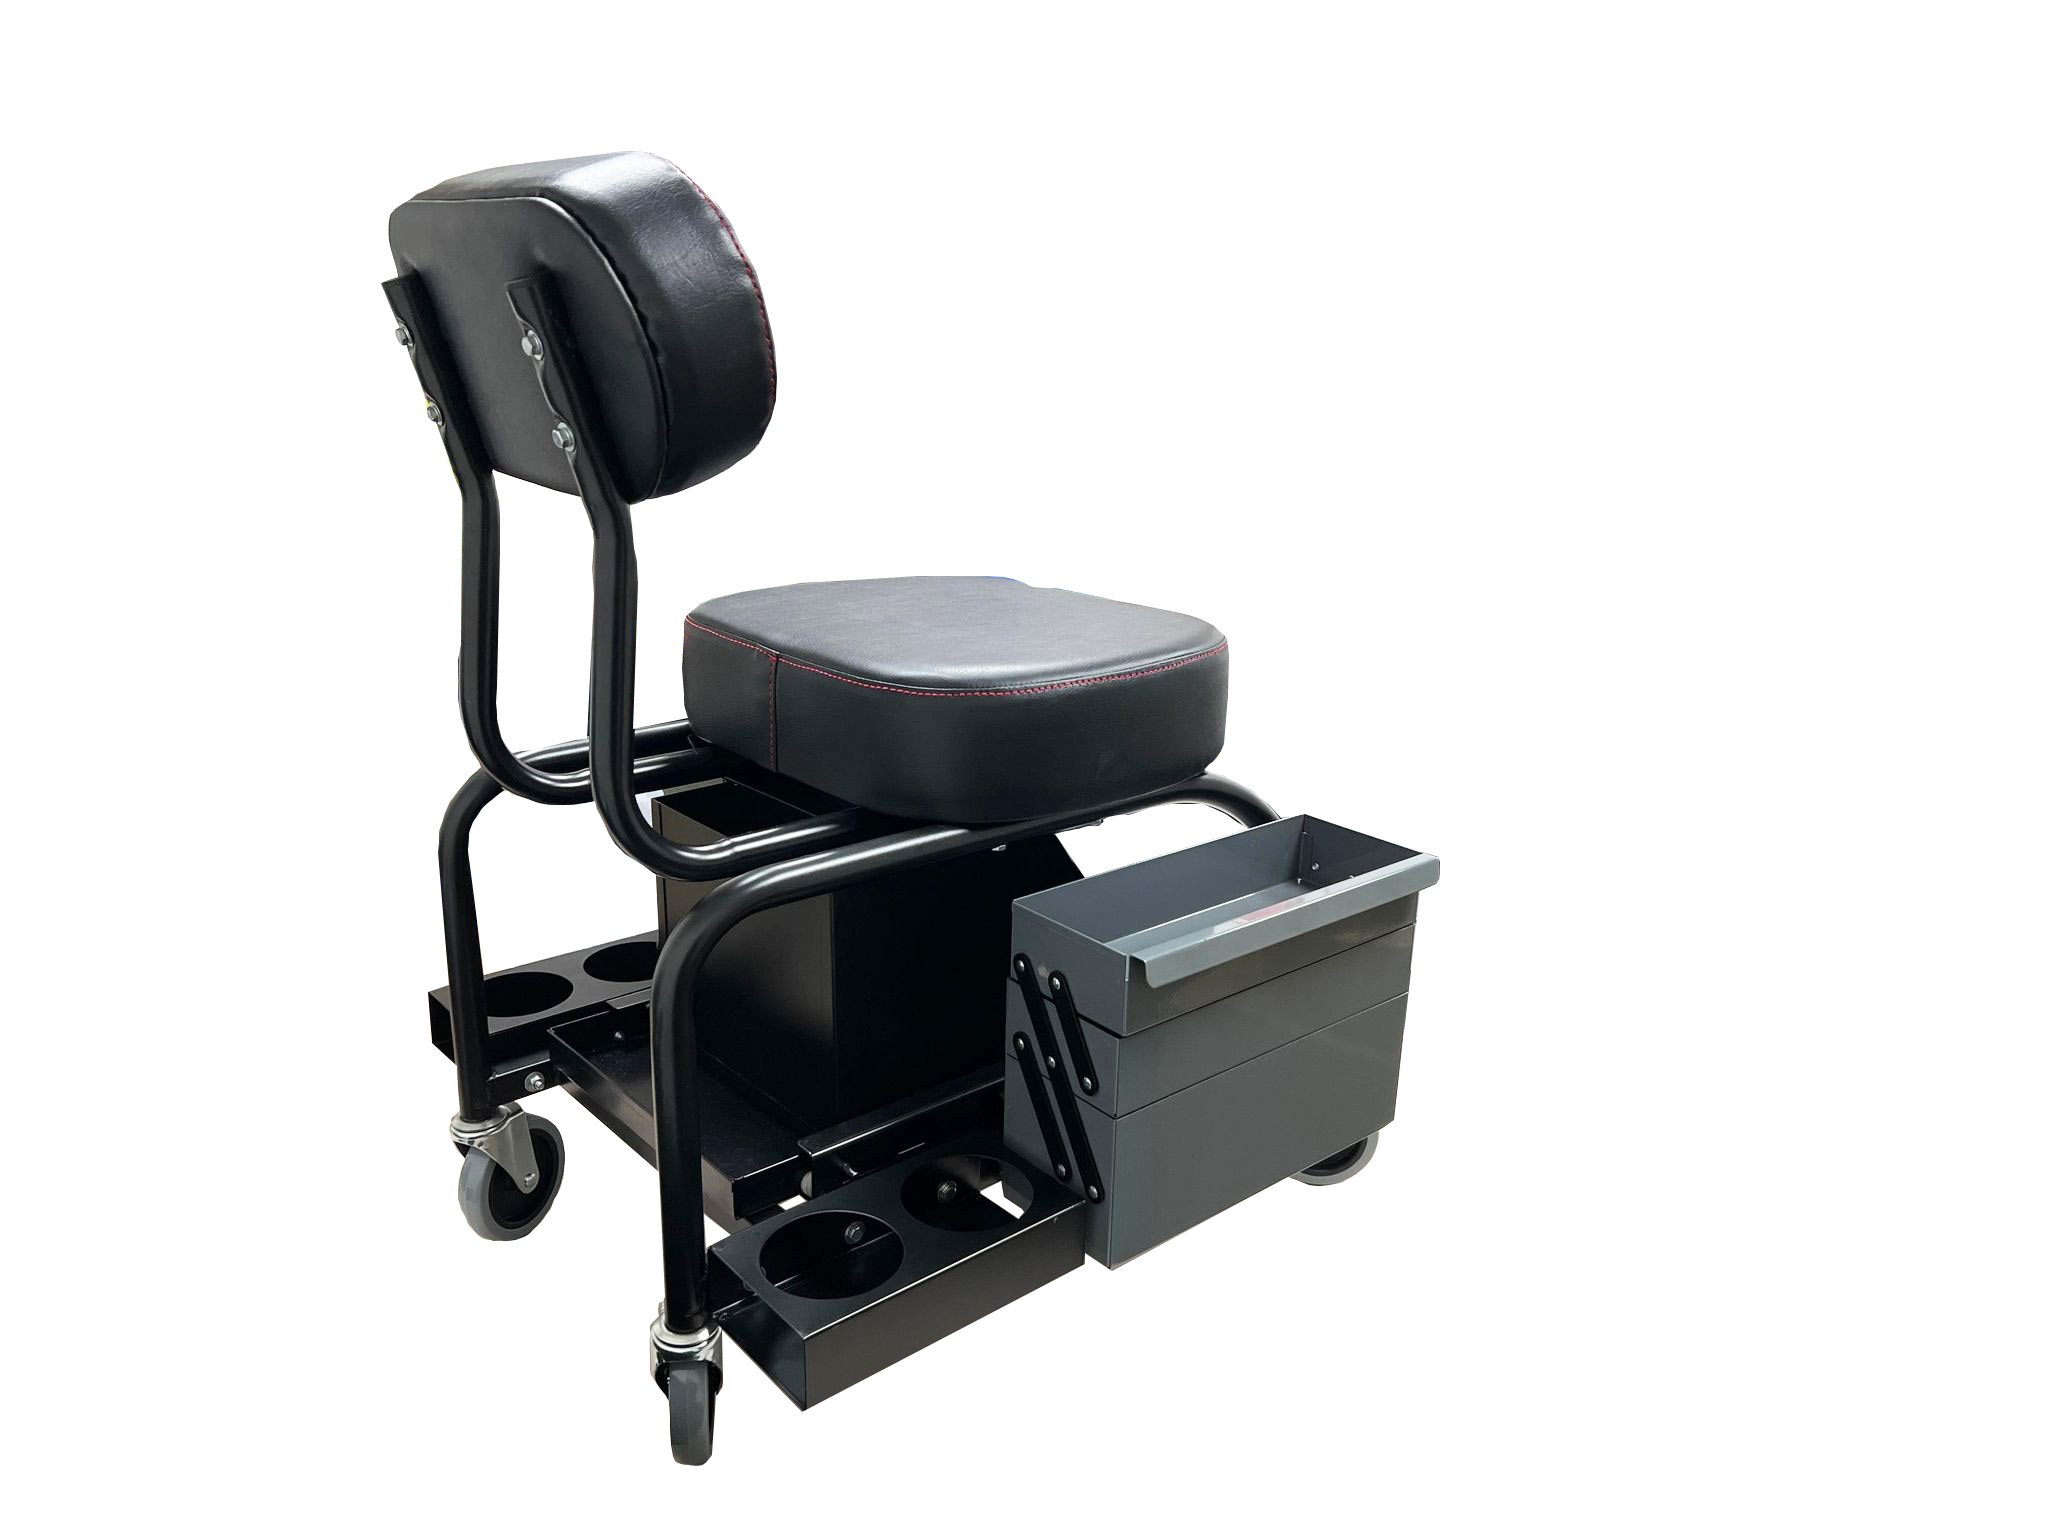 Powerbuilt Professional Shop Seat With Expandable Side Trays - 941929ECE - image 3 of 3